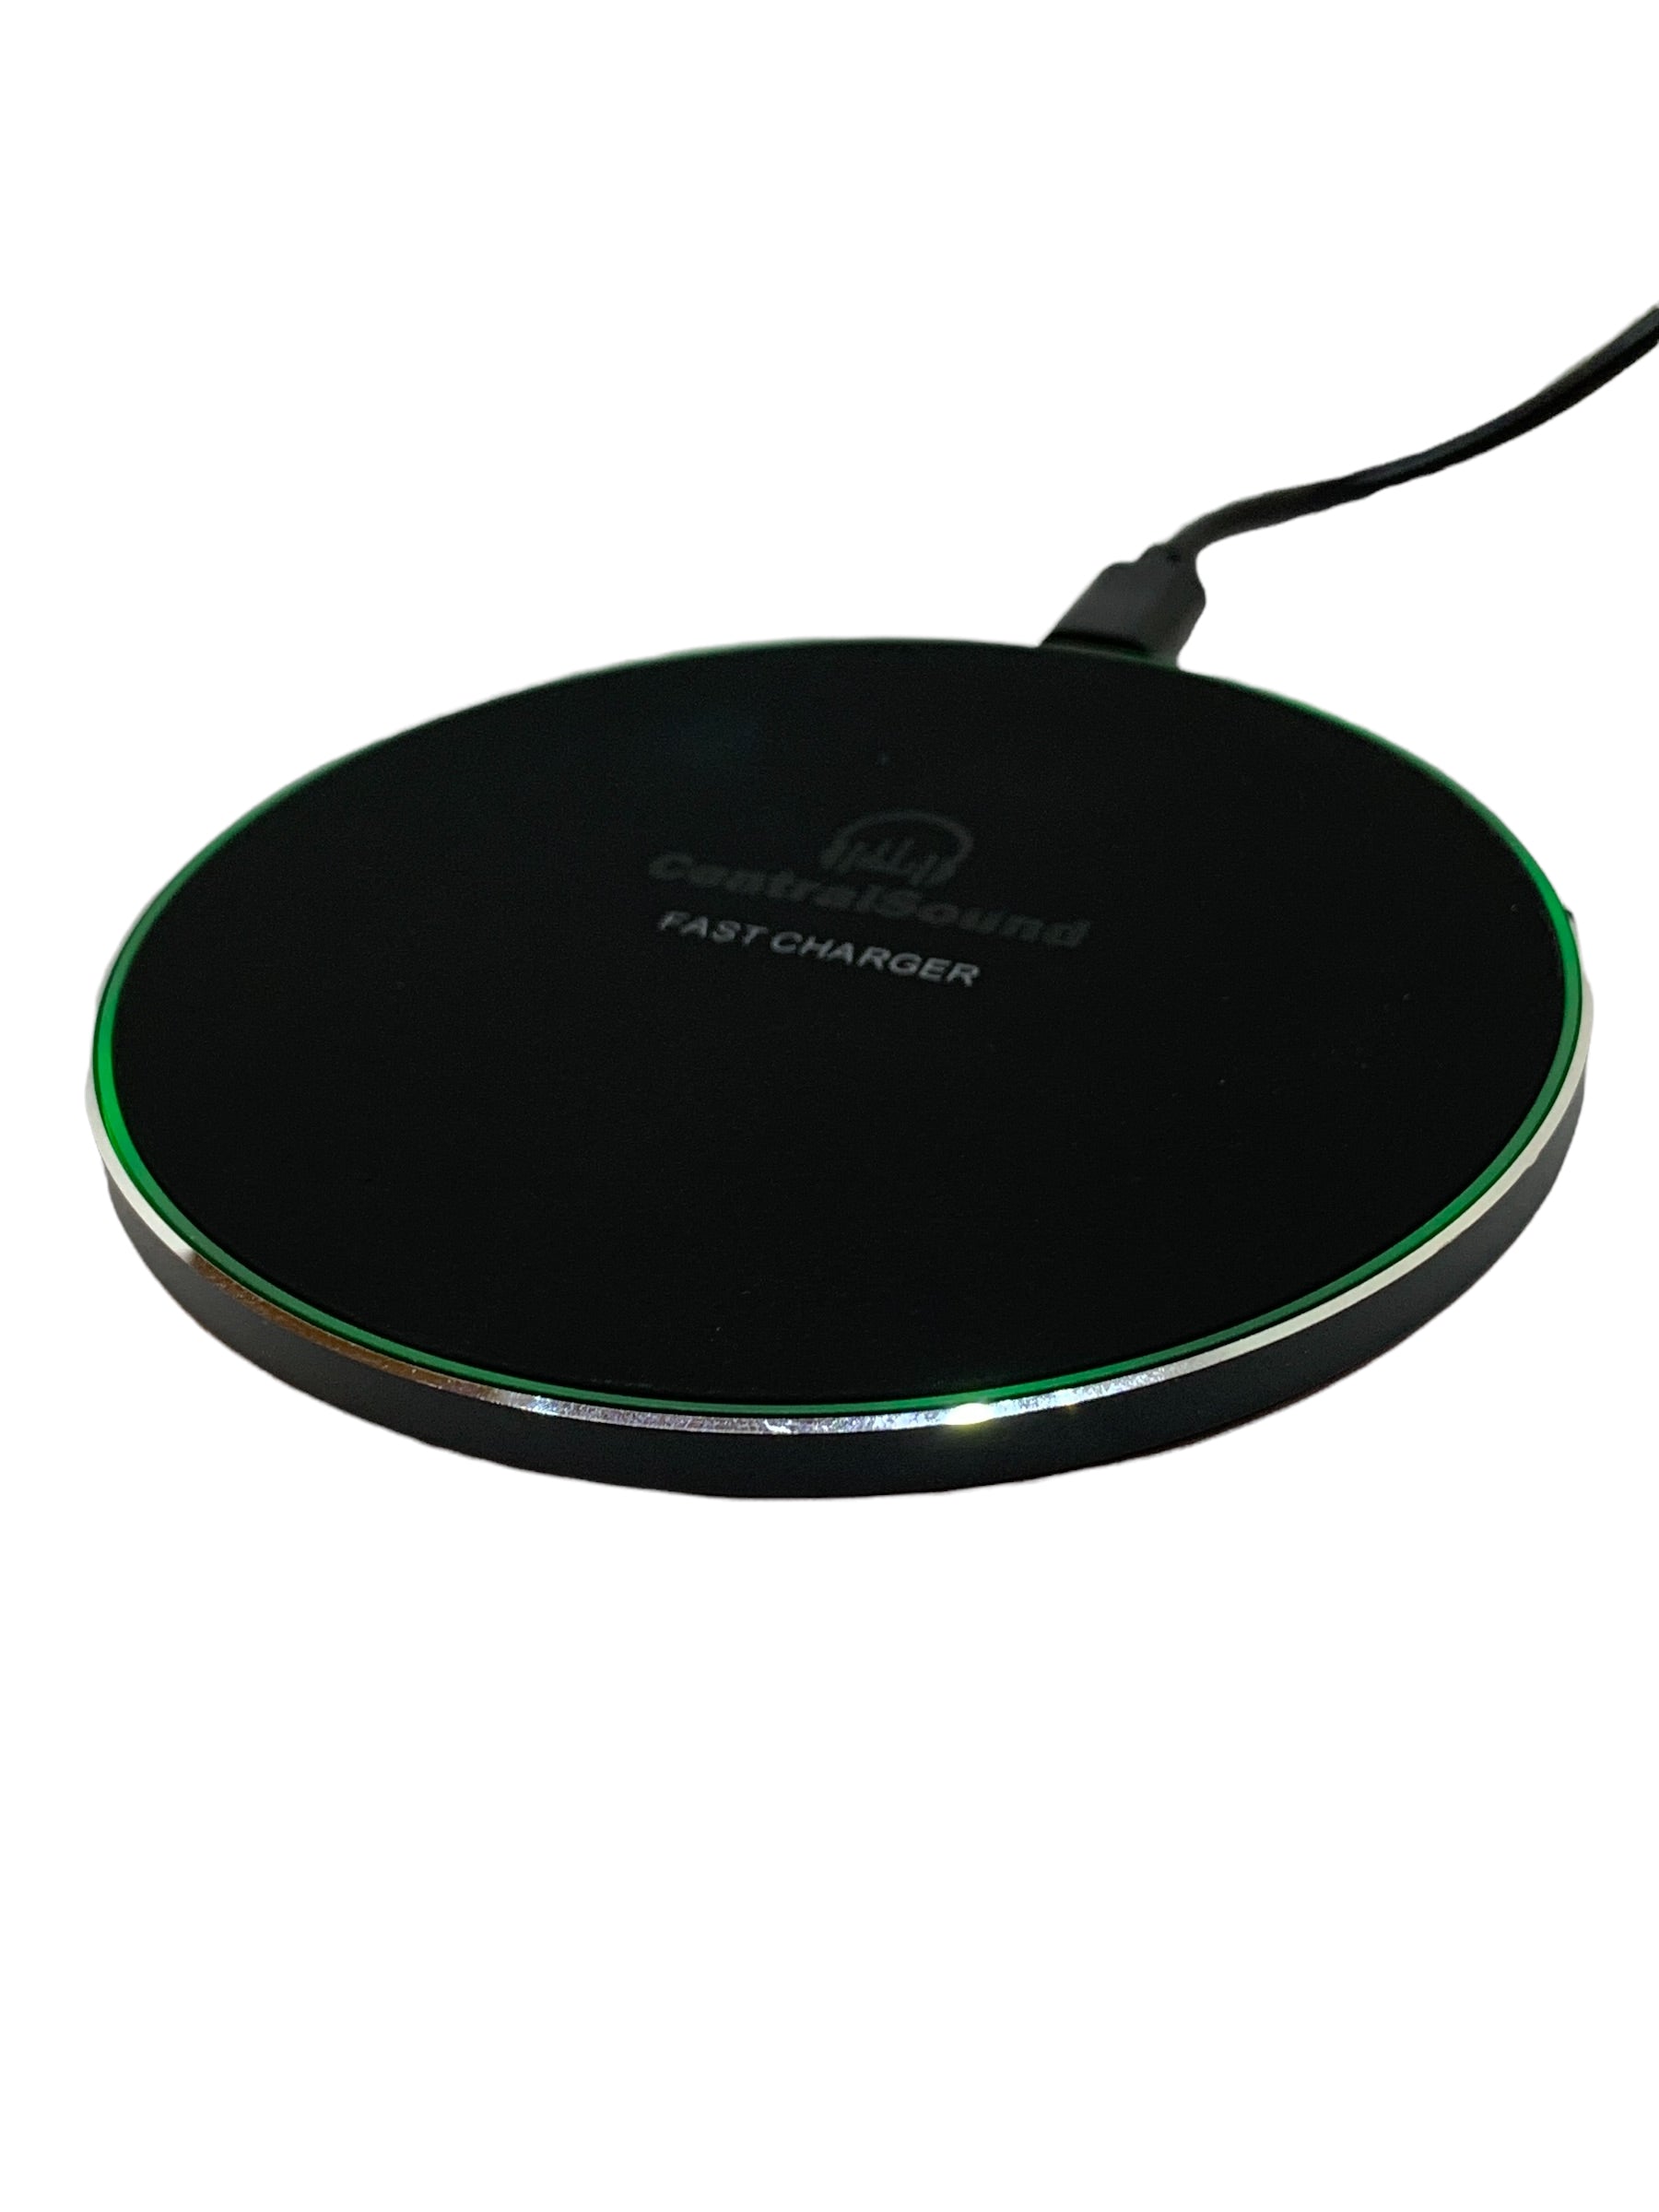 CentralSound Low Profile Qi Wireless Fast Charger Charging Pad |  Black - CentralSound